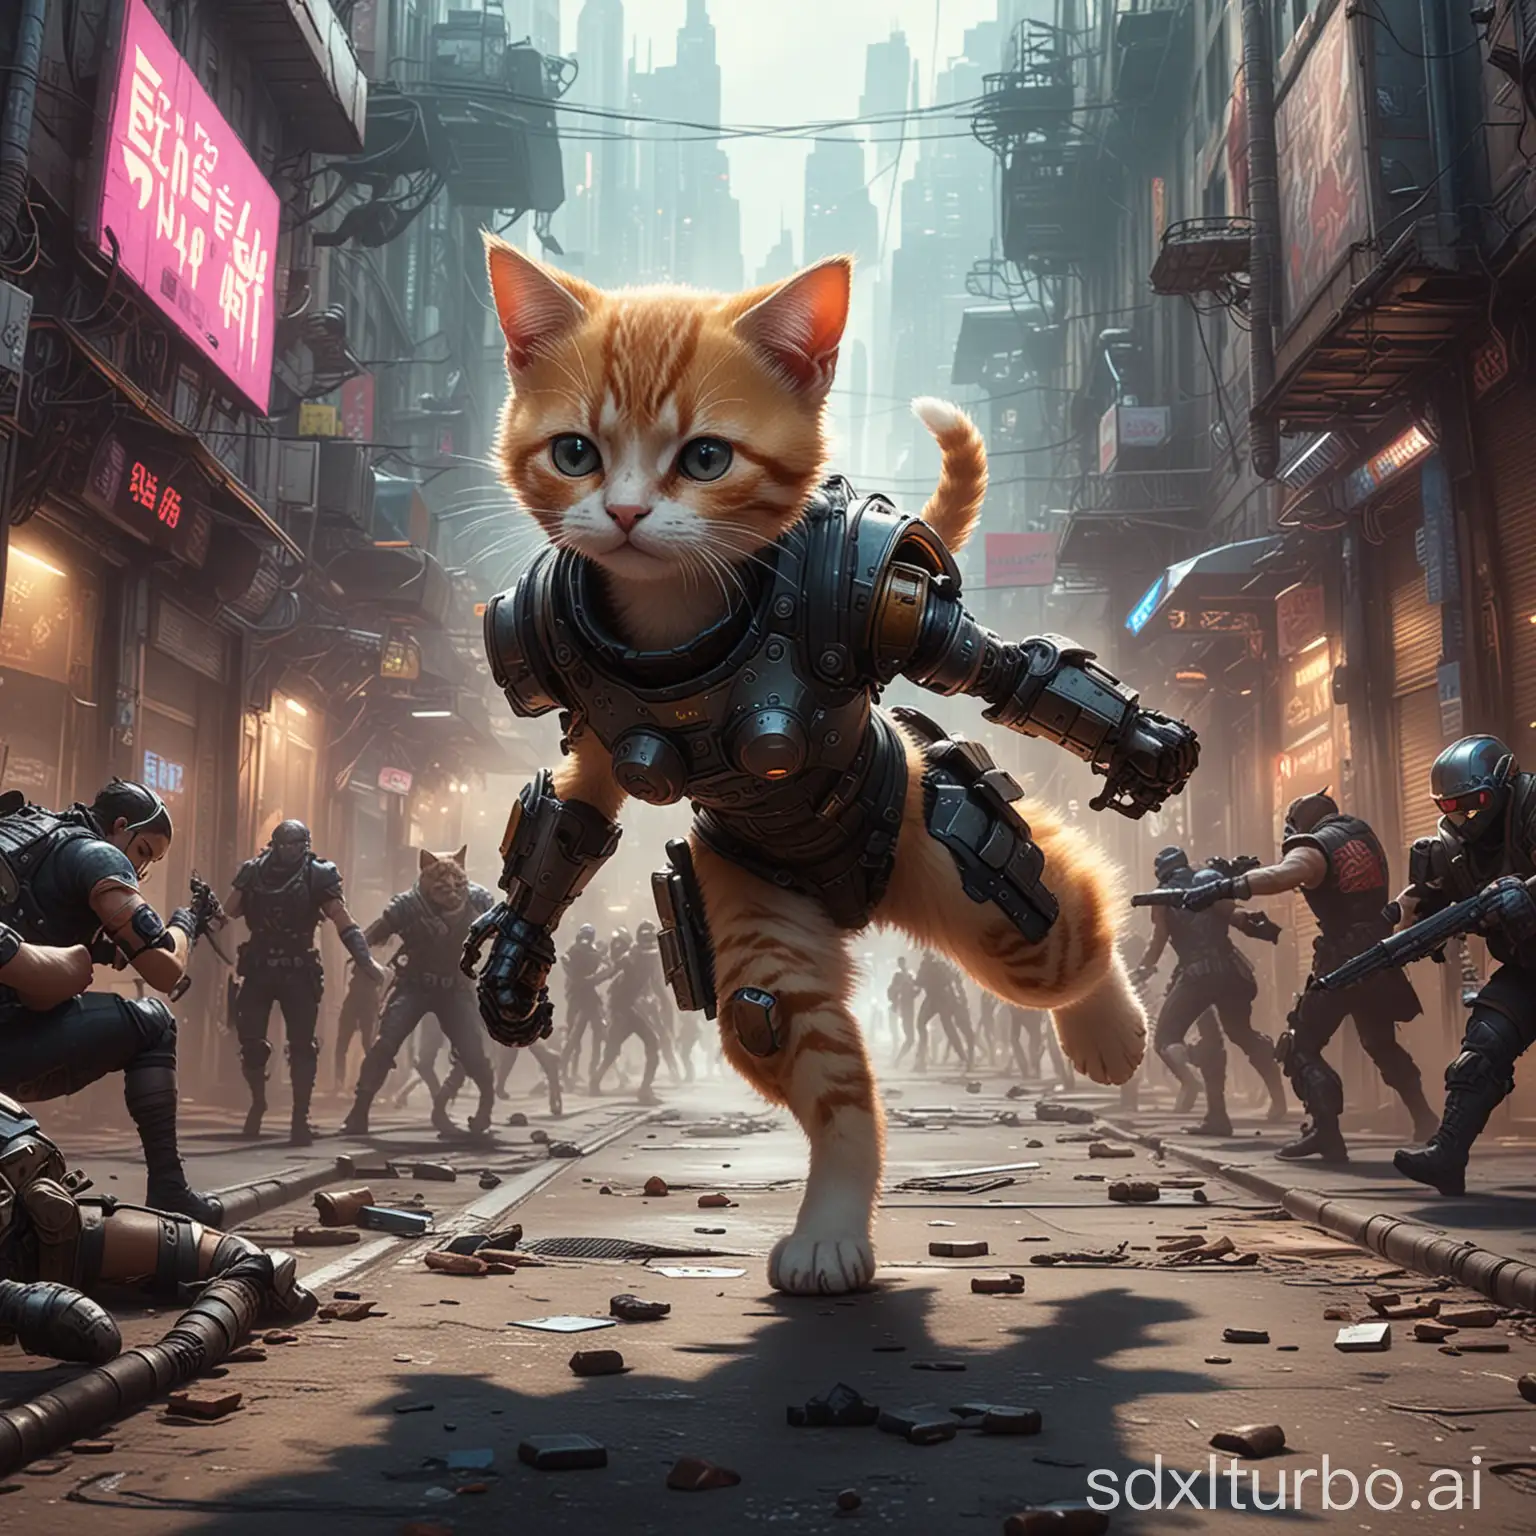 Mechanical brawls and kittens duel on the cyberpunk-style streets.